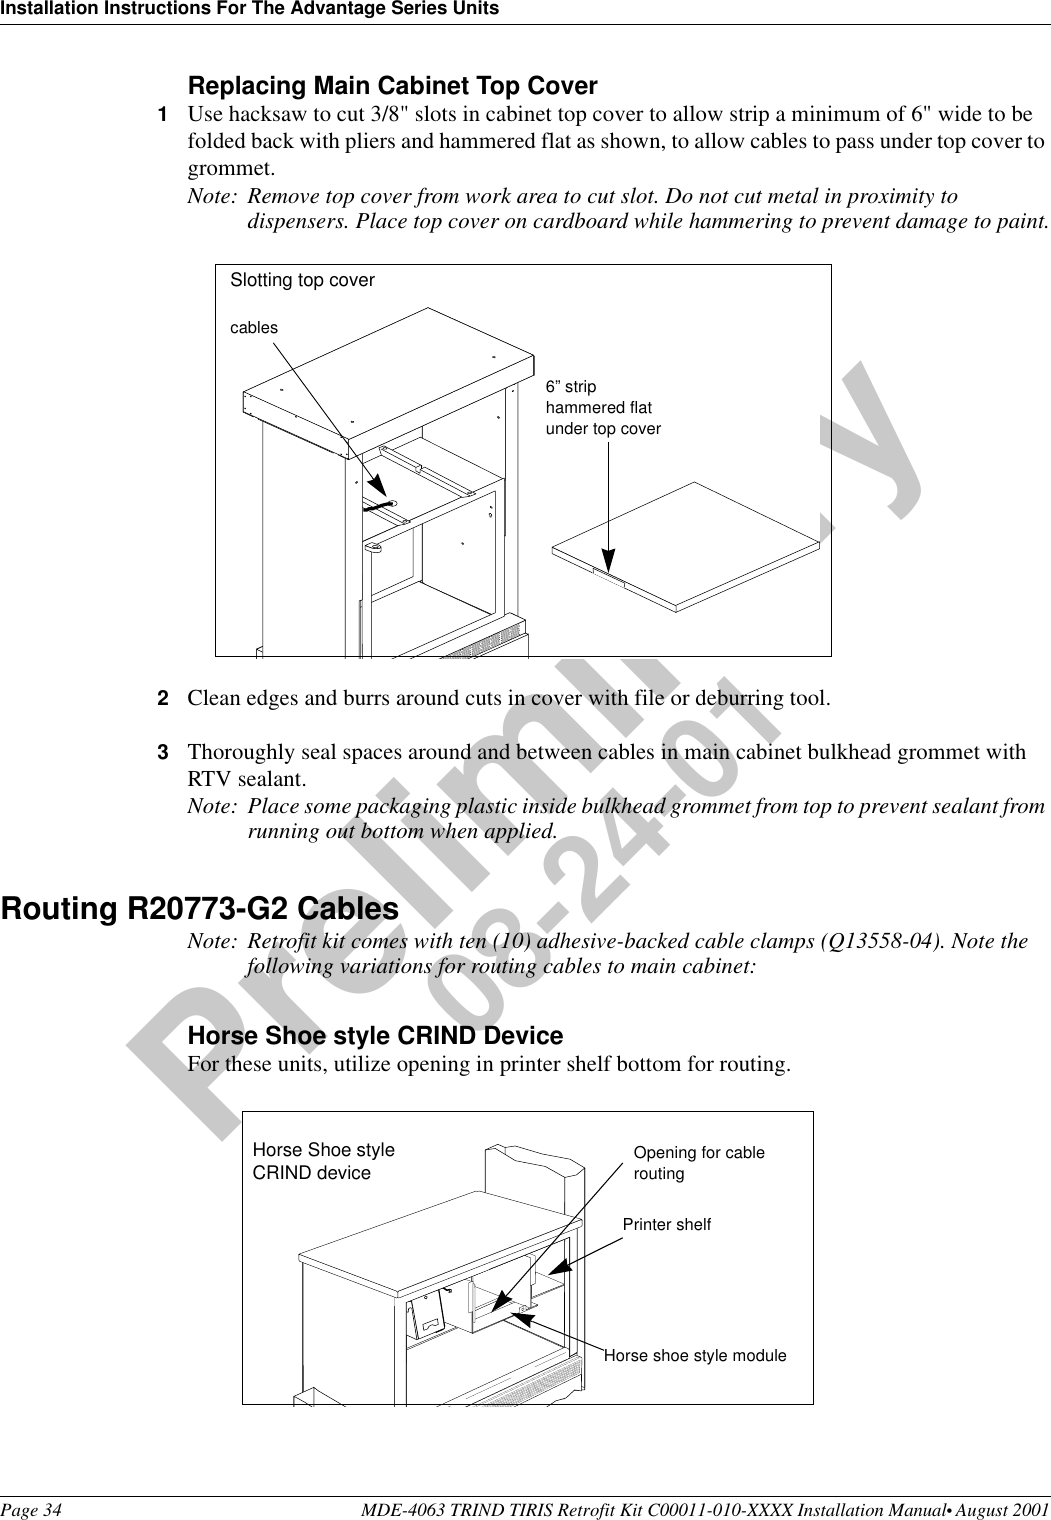 Installation Instructions For The Advantage Series UnitsPage 34 MDE-4063 TRIND TIRIS Retrofit Kit C00011-010-XXXX Installation Manual• August 2001Preliminary08-24-01Replacing Main Cabinet Top Cover1Use hacksaw to cut 3/8&quot; slots in cabinet top cover to allow strip a minimum of 6&quot; wide to be folded back with pliers and hammered flat as shown, to allow cables to pass under top cover to grommet. Note: Remove top cover from work area to cut slot. Do not cut metal in proximity to dispensers. Place top cover on cardboard while hammering to prevent damage to paint.2Clean edges and burrs around cuts in cover with file or deburring tool. 3Thoroughly seal spaces around and between cables in main cabinet bulkhead grommet with RTV sealant.Note: Place some packaging plastic inside bulkhead grommet from top to prevent sealant from running out bottom when applied.Routing R20773-G2 CablesNote: Retrofit kit comes with ten (10) adhesive-backed cable clamps (Q13558-04). Note the following variations for routing cables to main cabinet:Horse Shoe style CRIND DeviceFor these units, utilize opening in printer shelf bottom for routing.6” strip hammered flat under top covercablesSlotting top coverHorse Shoe style CRIND devicePrinter shelfHorse shoe style moduleOpening for cable routing